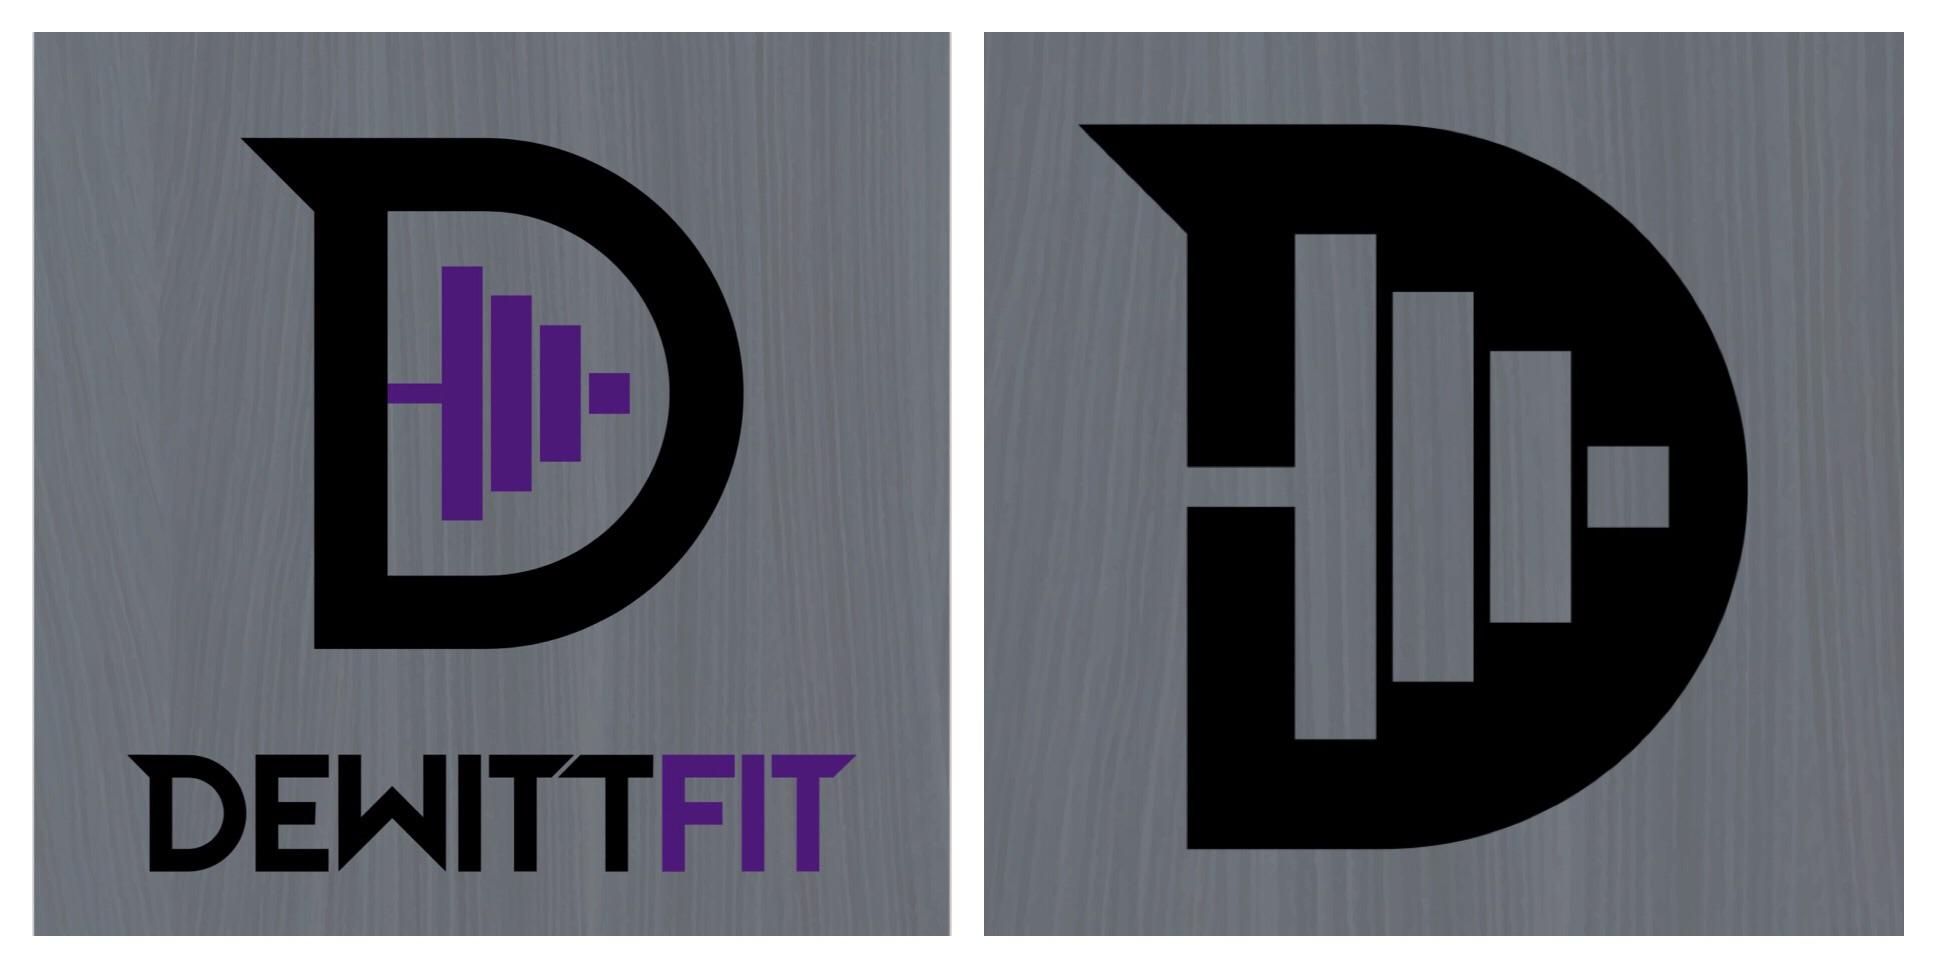 Personal Garage Logo - Thanks for all the help with my personal garage gym logo(s)! I ...